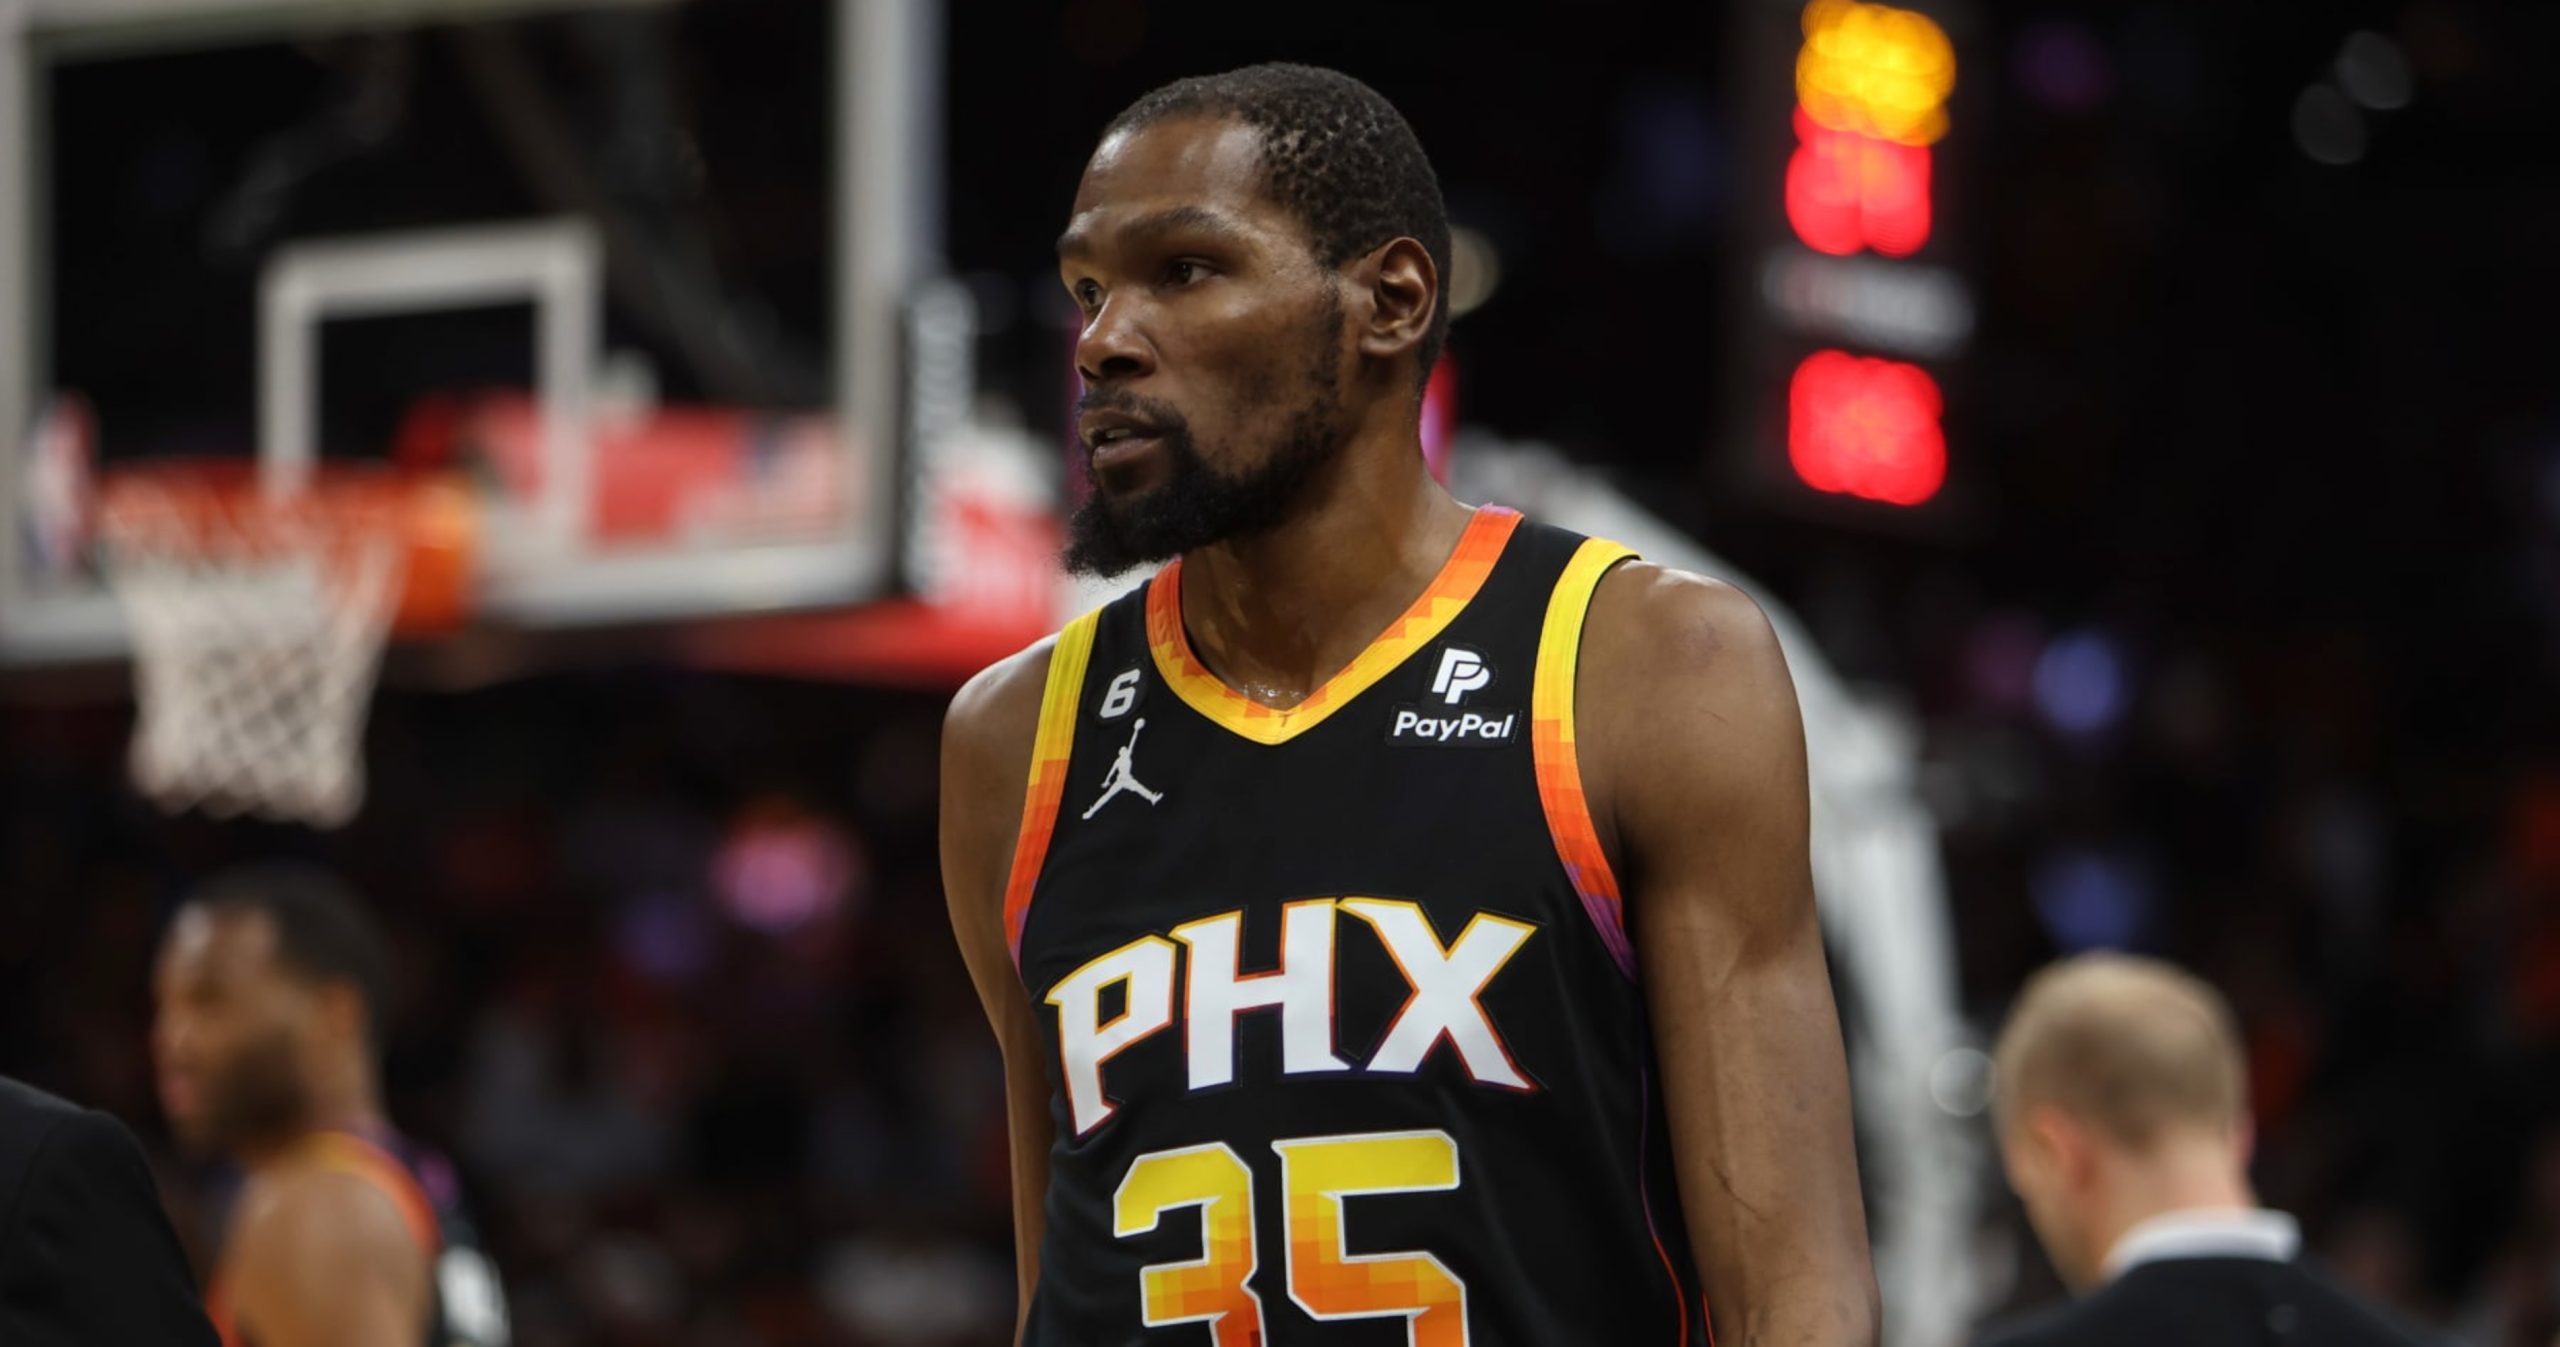 NBA News Is Kevin Durant Playing Tonight vs Nets The Suns' Big Three Have to Wait Before Suiting up Together for the First Time